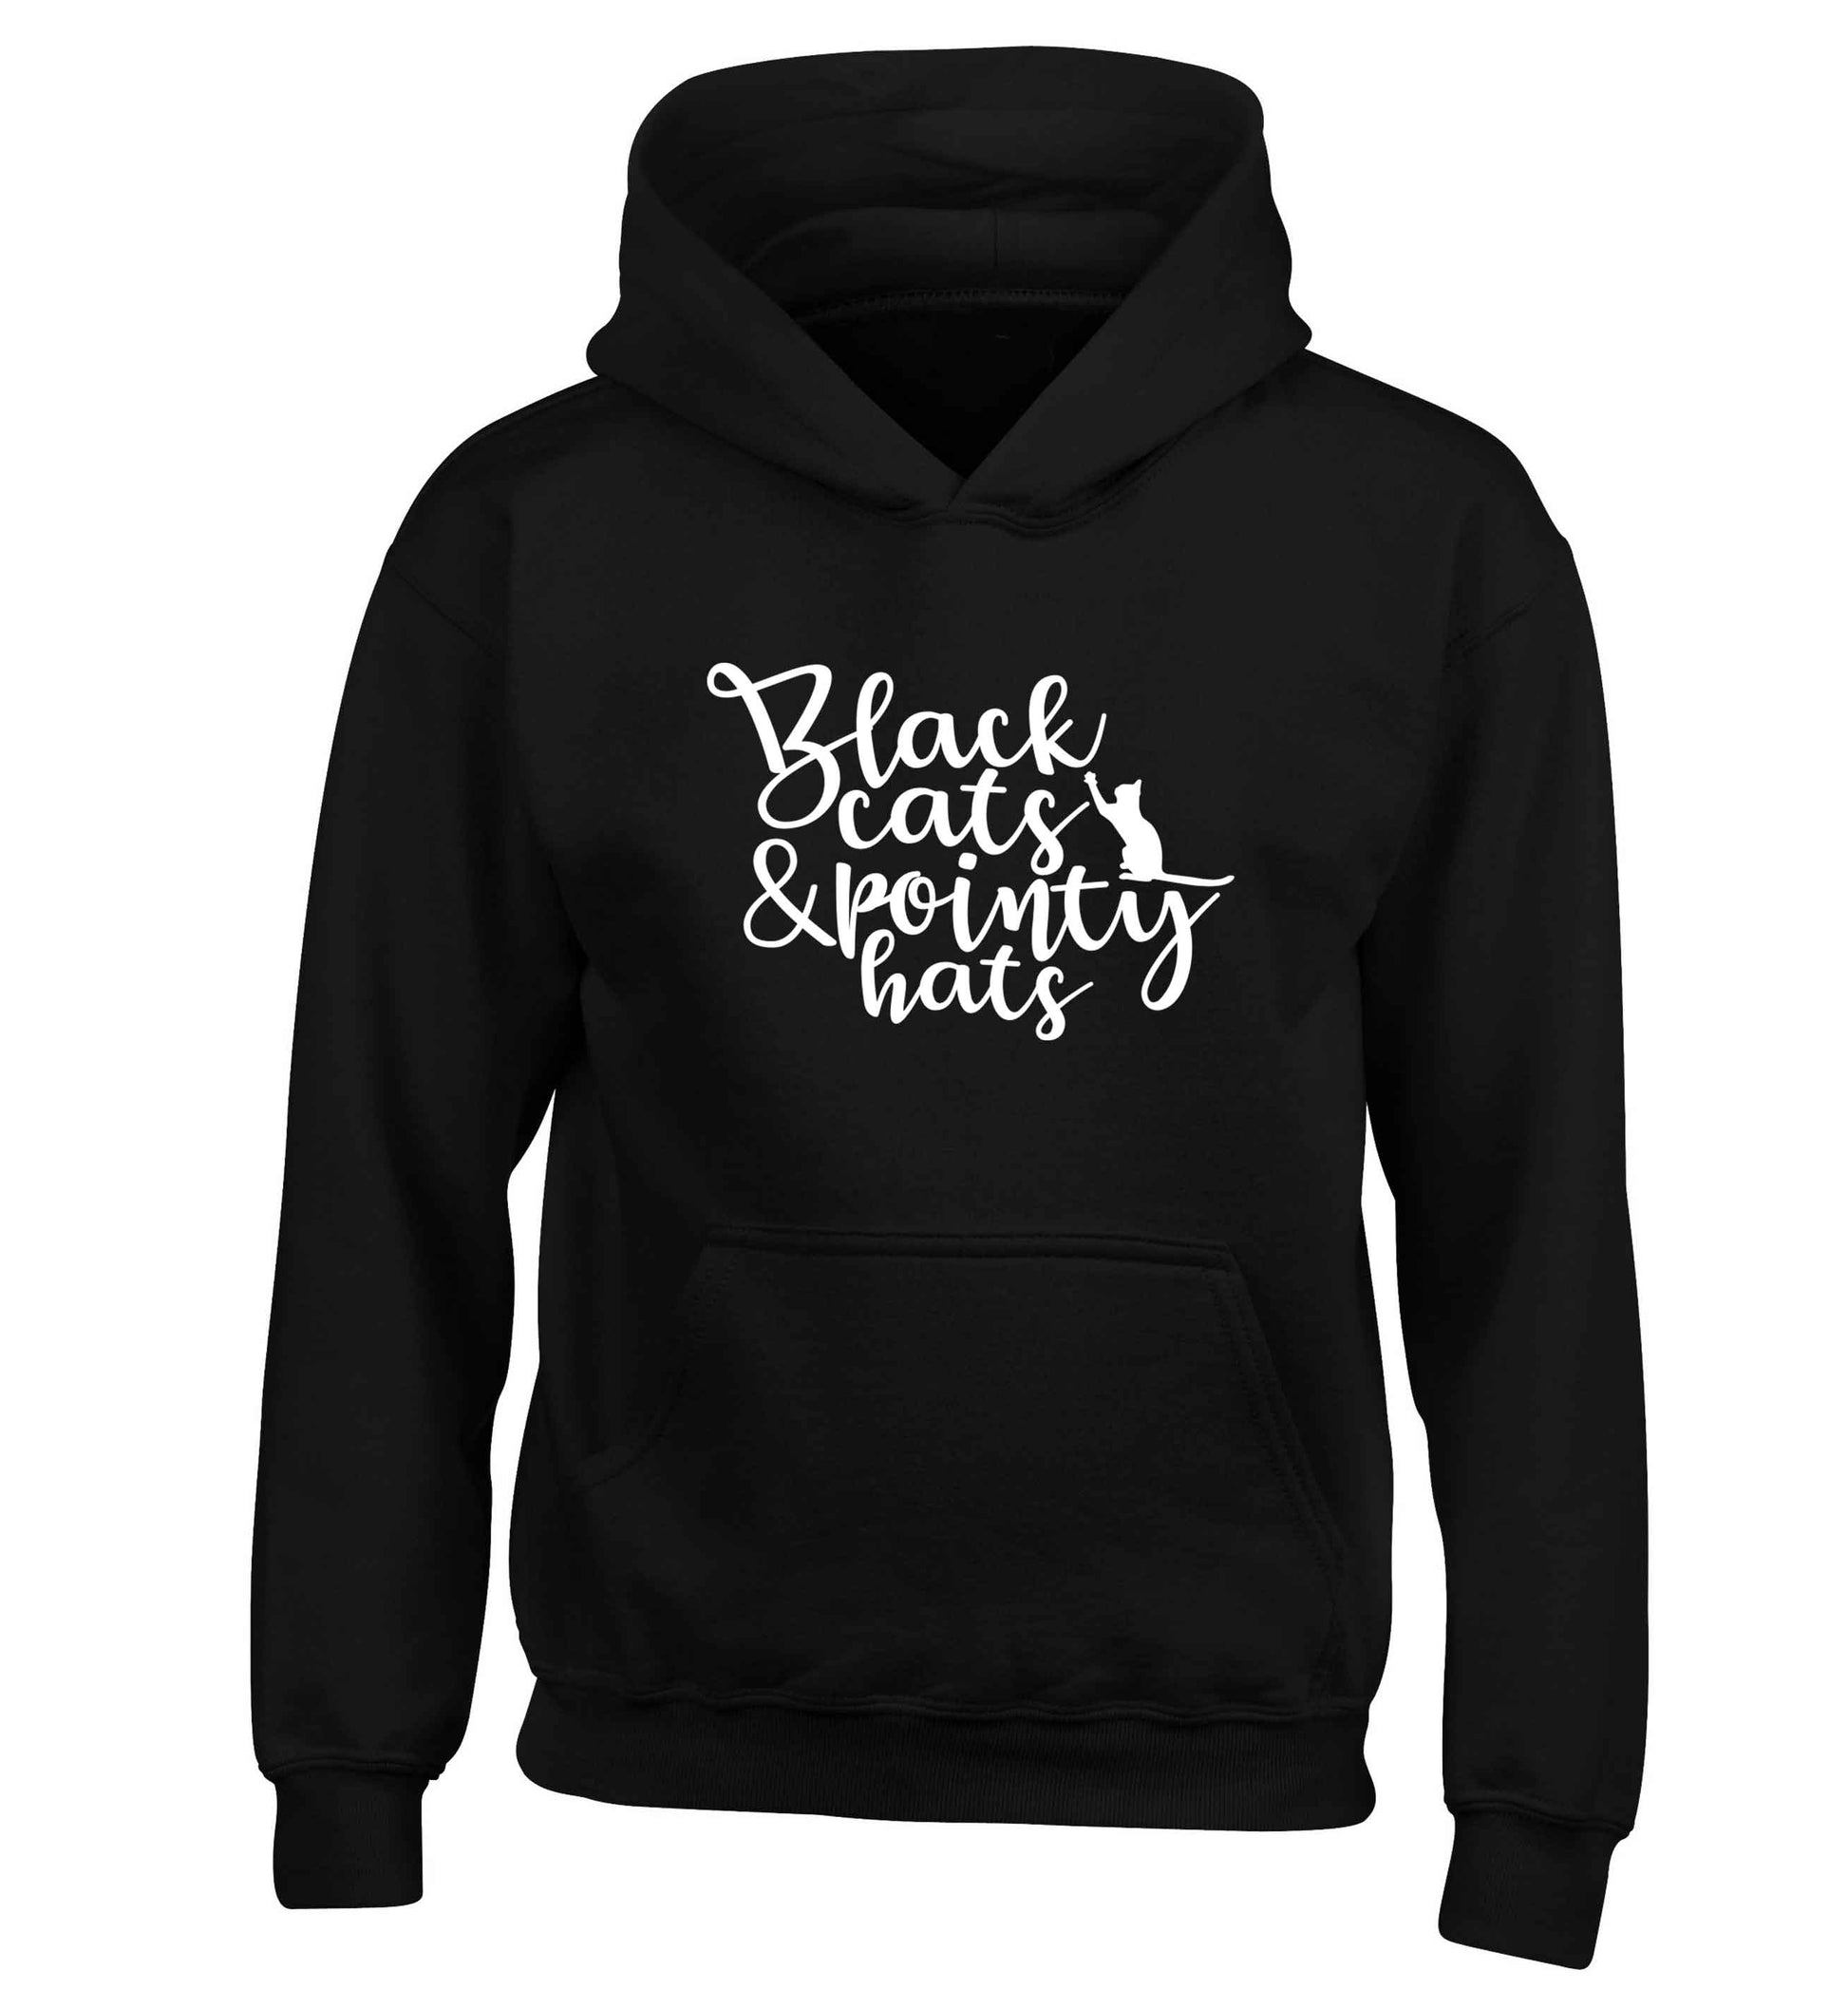 Black cats and pointy hats children's black hoodie 12-13 Years